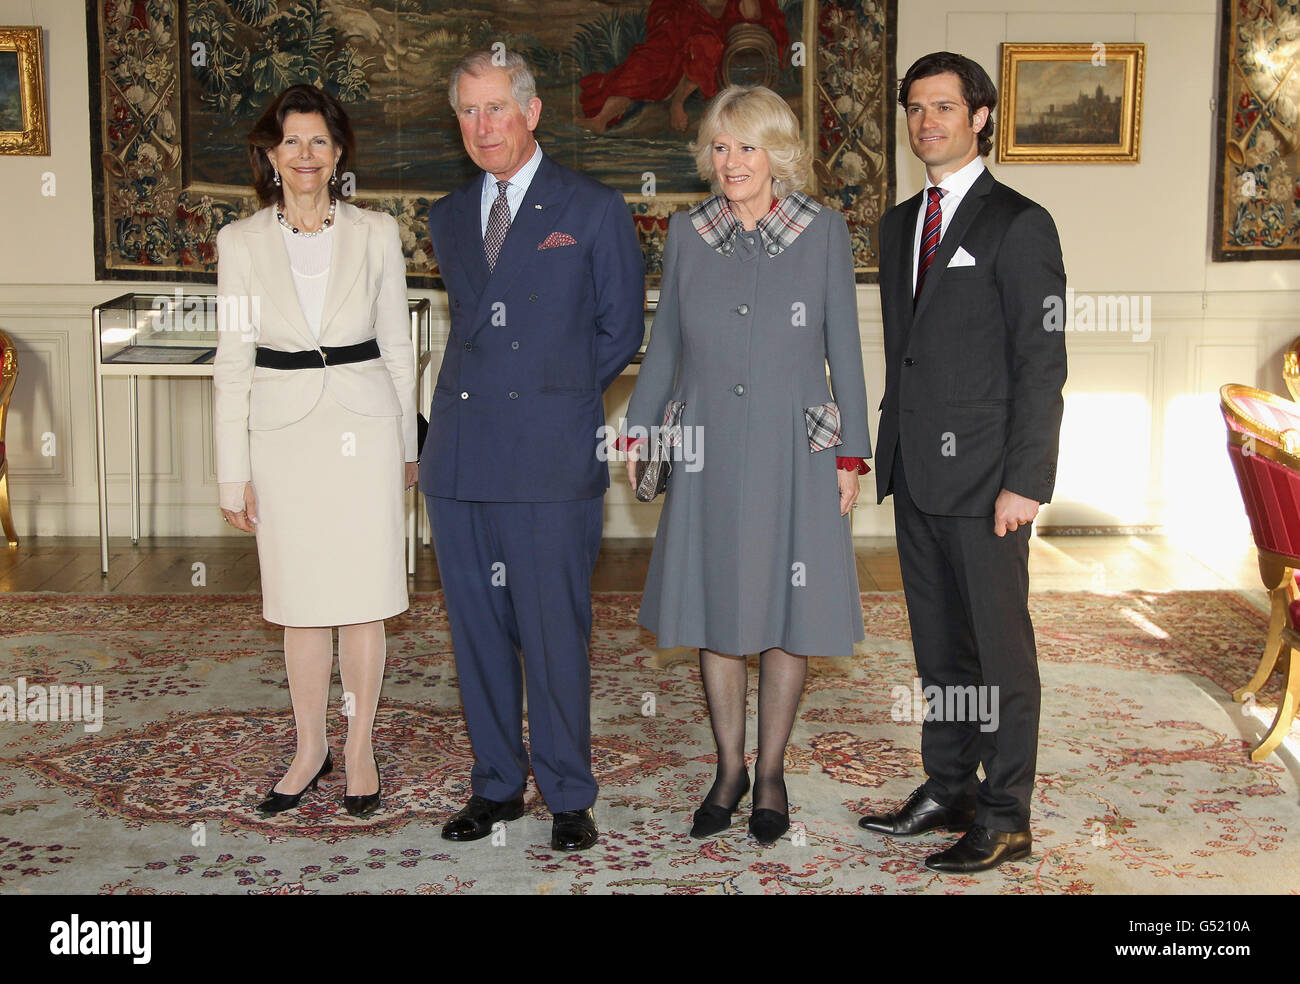 (left - right) Queen Silvia of Sweden, The Prince of Wales, The Duchess of Cornwall and Prince Carl Philip of Sweden pose for an official photo in the Royal Palace in Stockholm, Sweden. Stock Photo